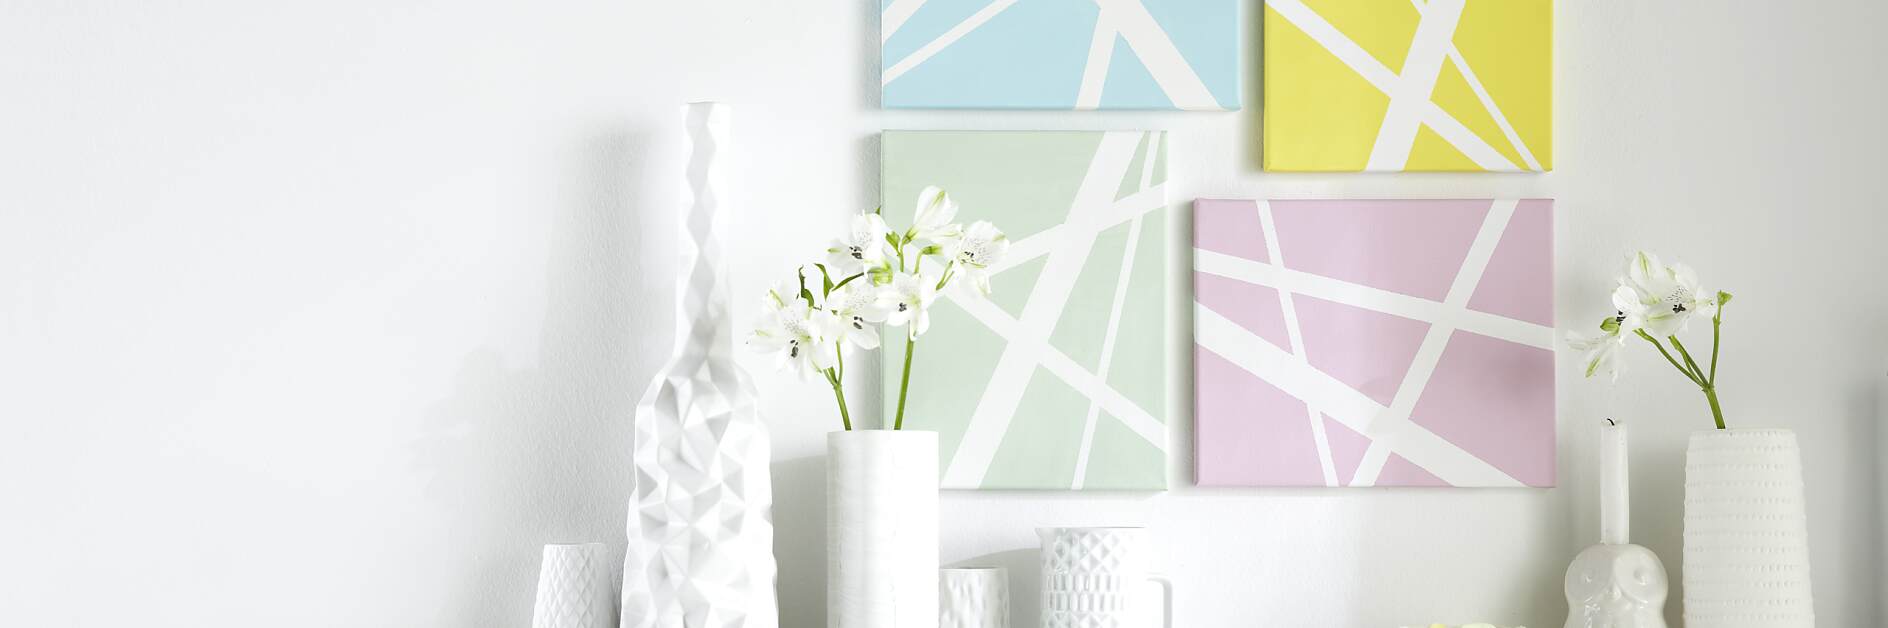 With pastel pictures, your home will be swimming in color